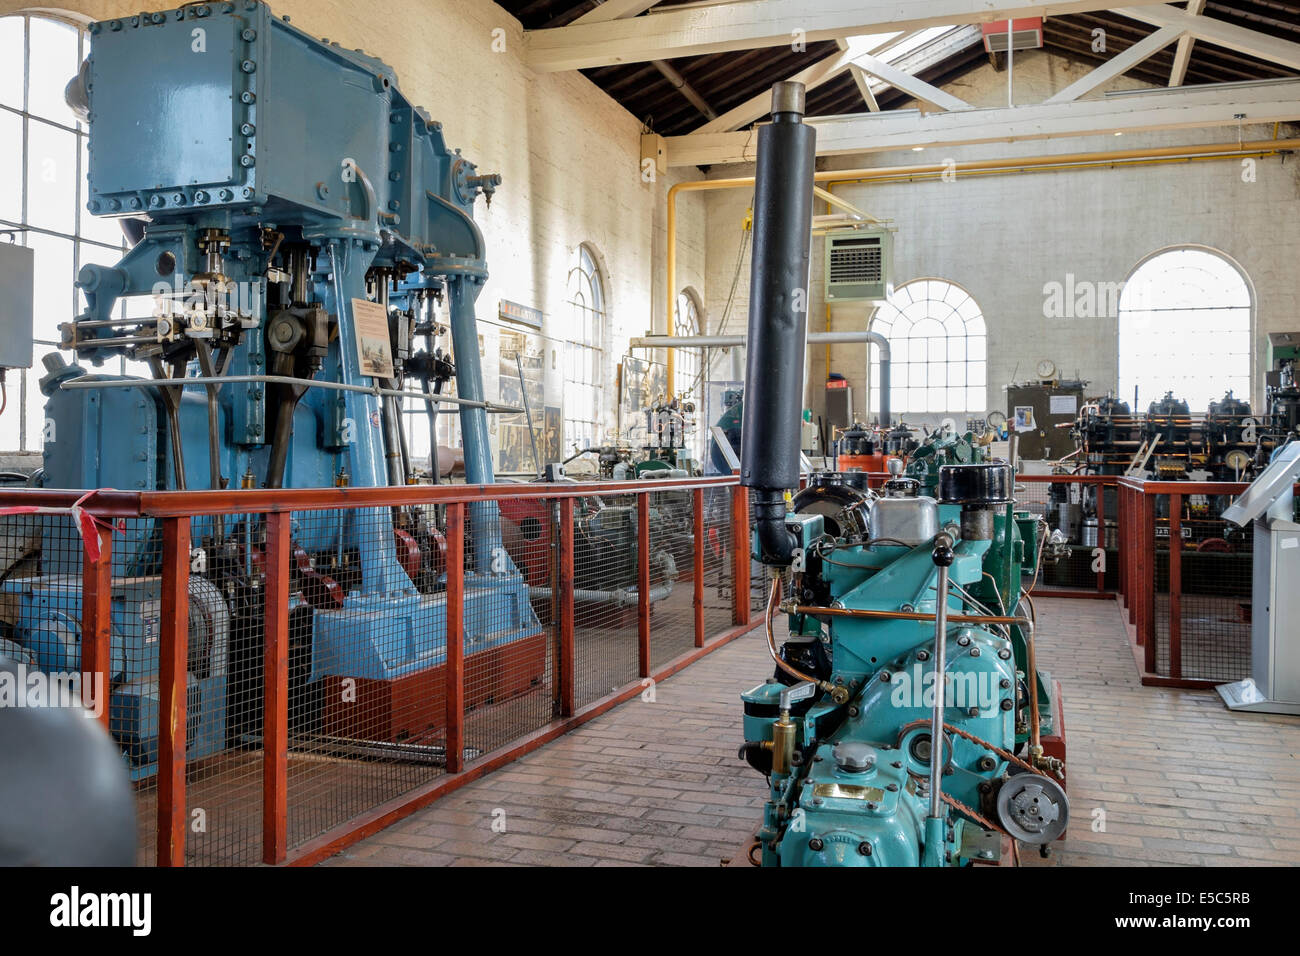 Old engines on display inside the Power Hall engine room at National Waterways Museum. Ellesmere Port Cheshire England UK Stock Photo